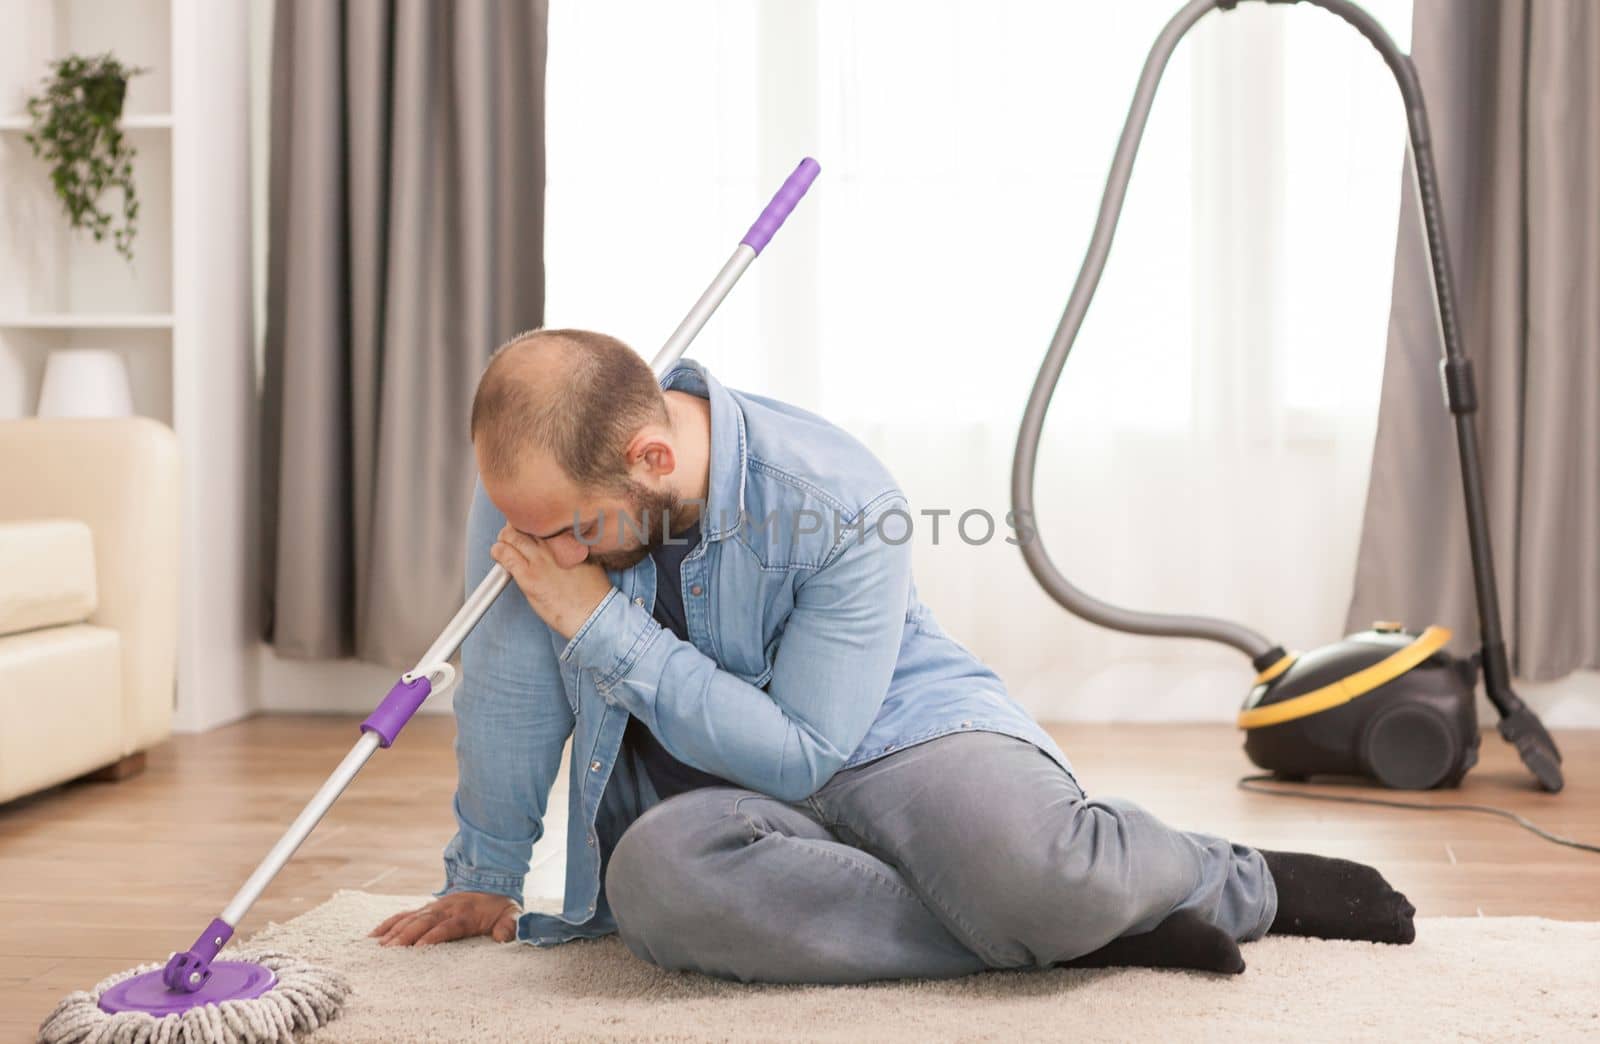 Exhausted husband on rug after housekeeping.